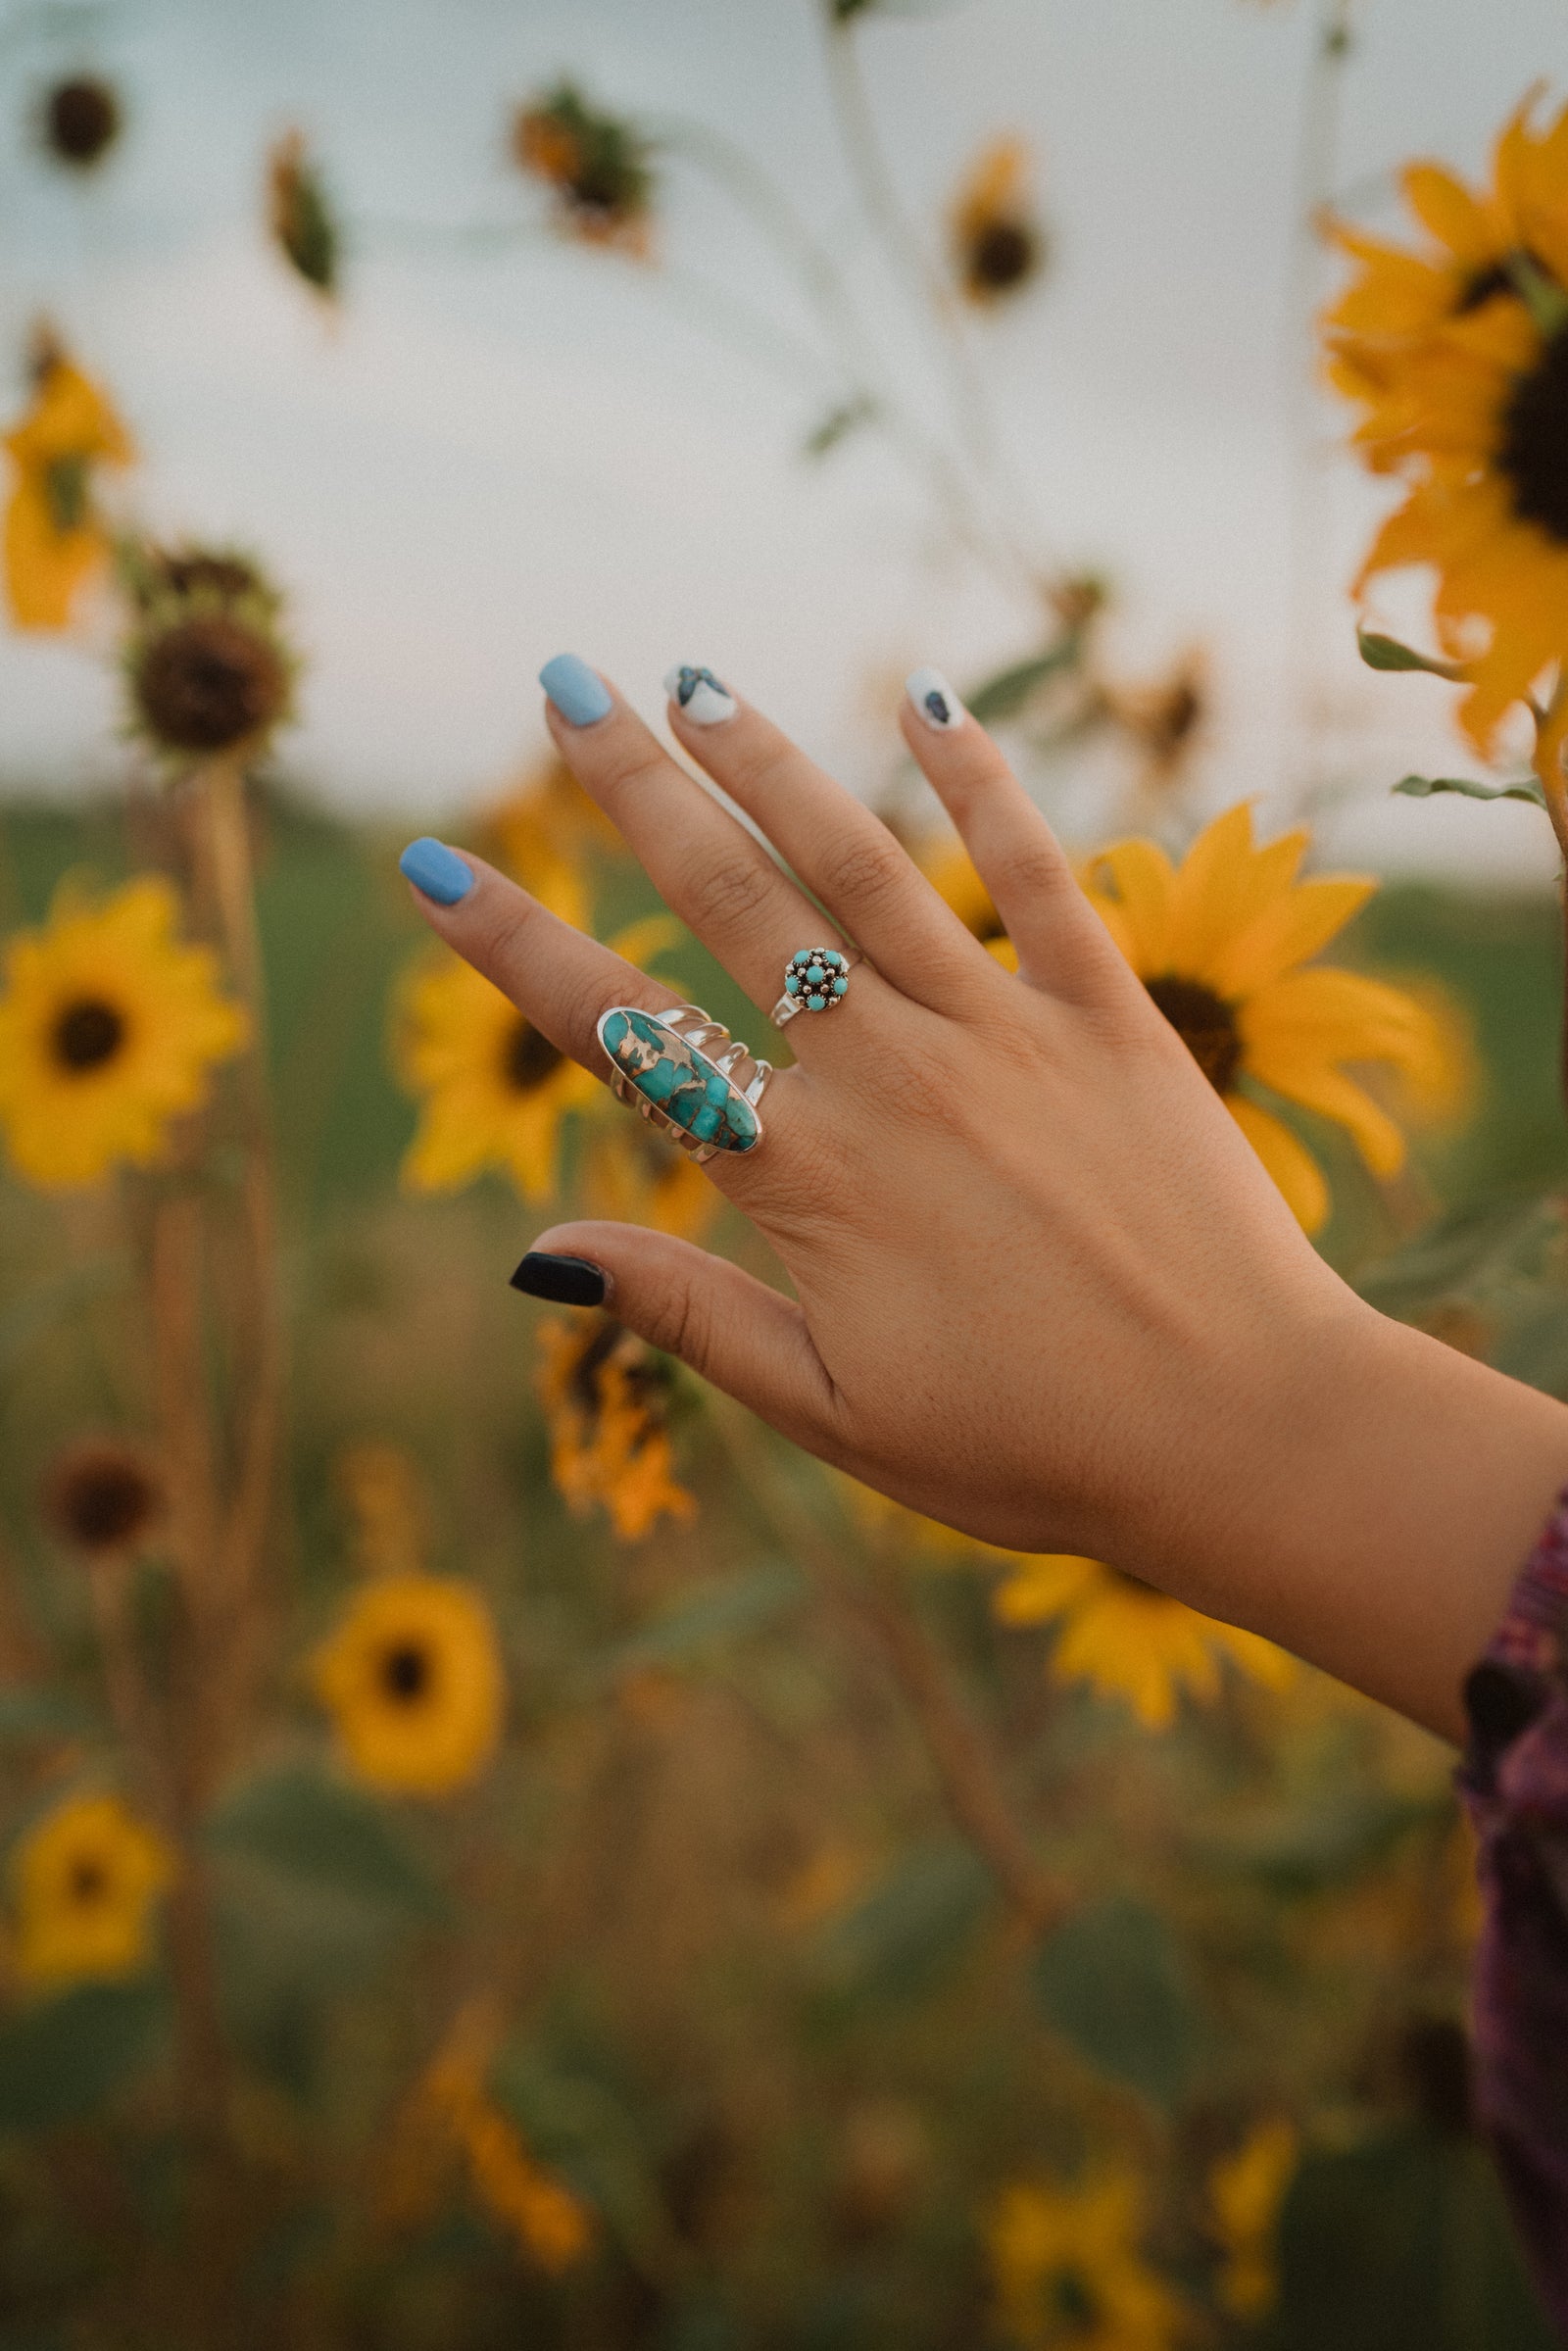 Cheyenne Ring | Blue Copper Turquoise - FINAL SALE